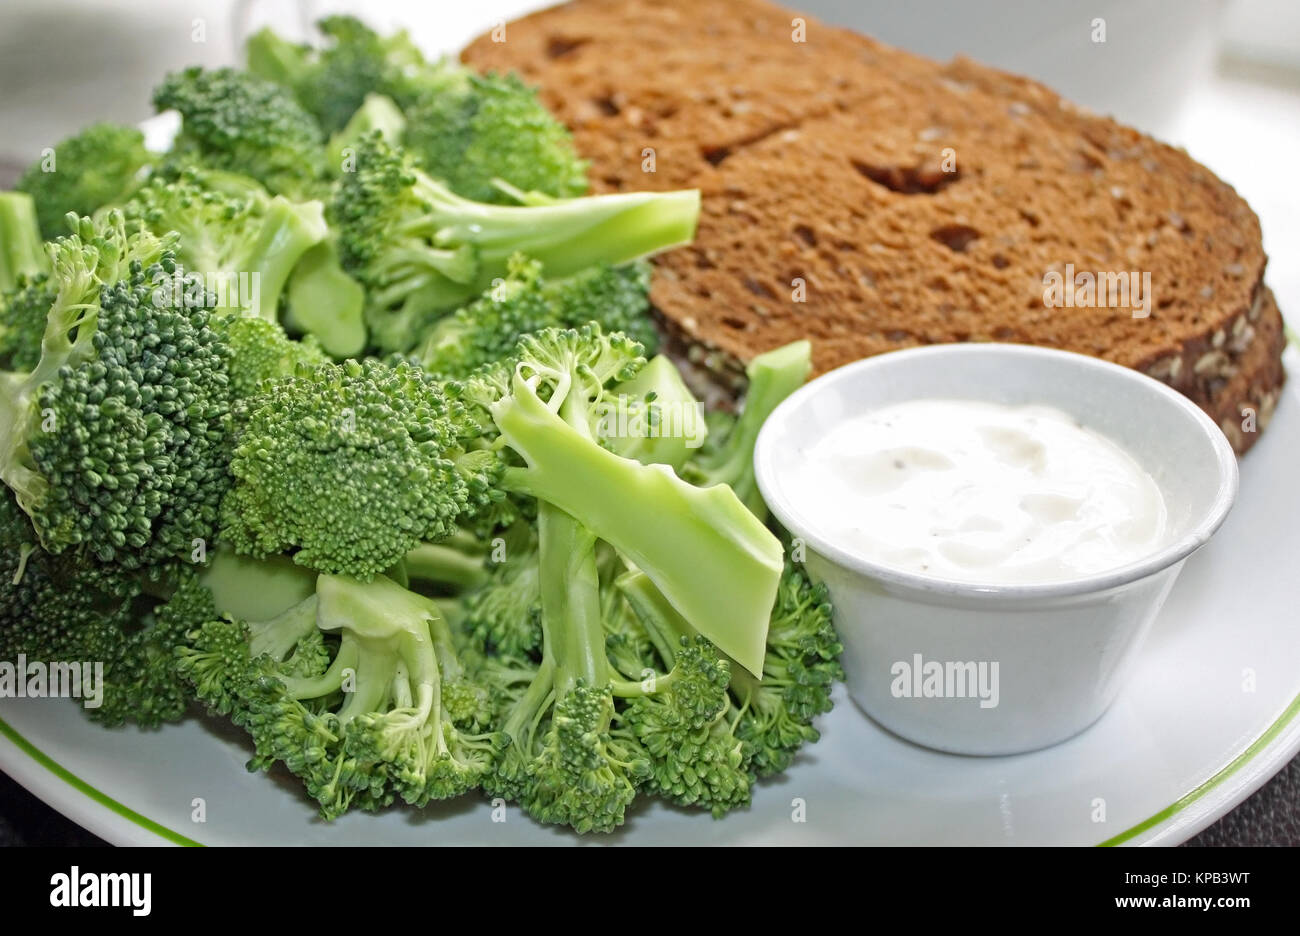 Nutritious rye bread sandwich with a side of fresh raw broccoli and a dipping sauce Stock Photo